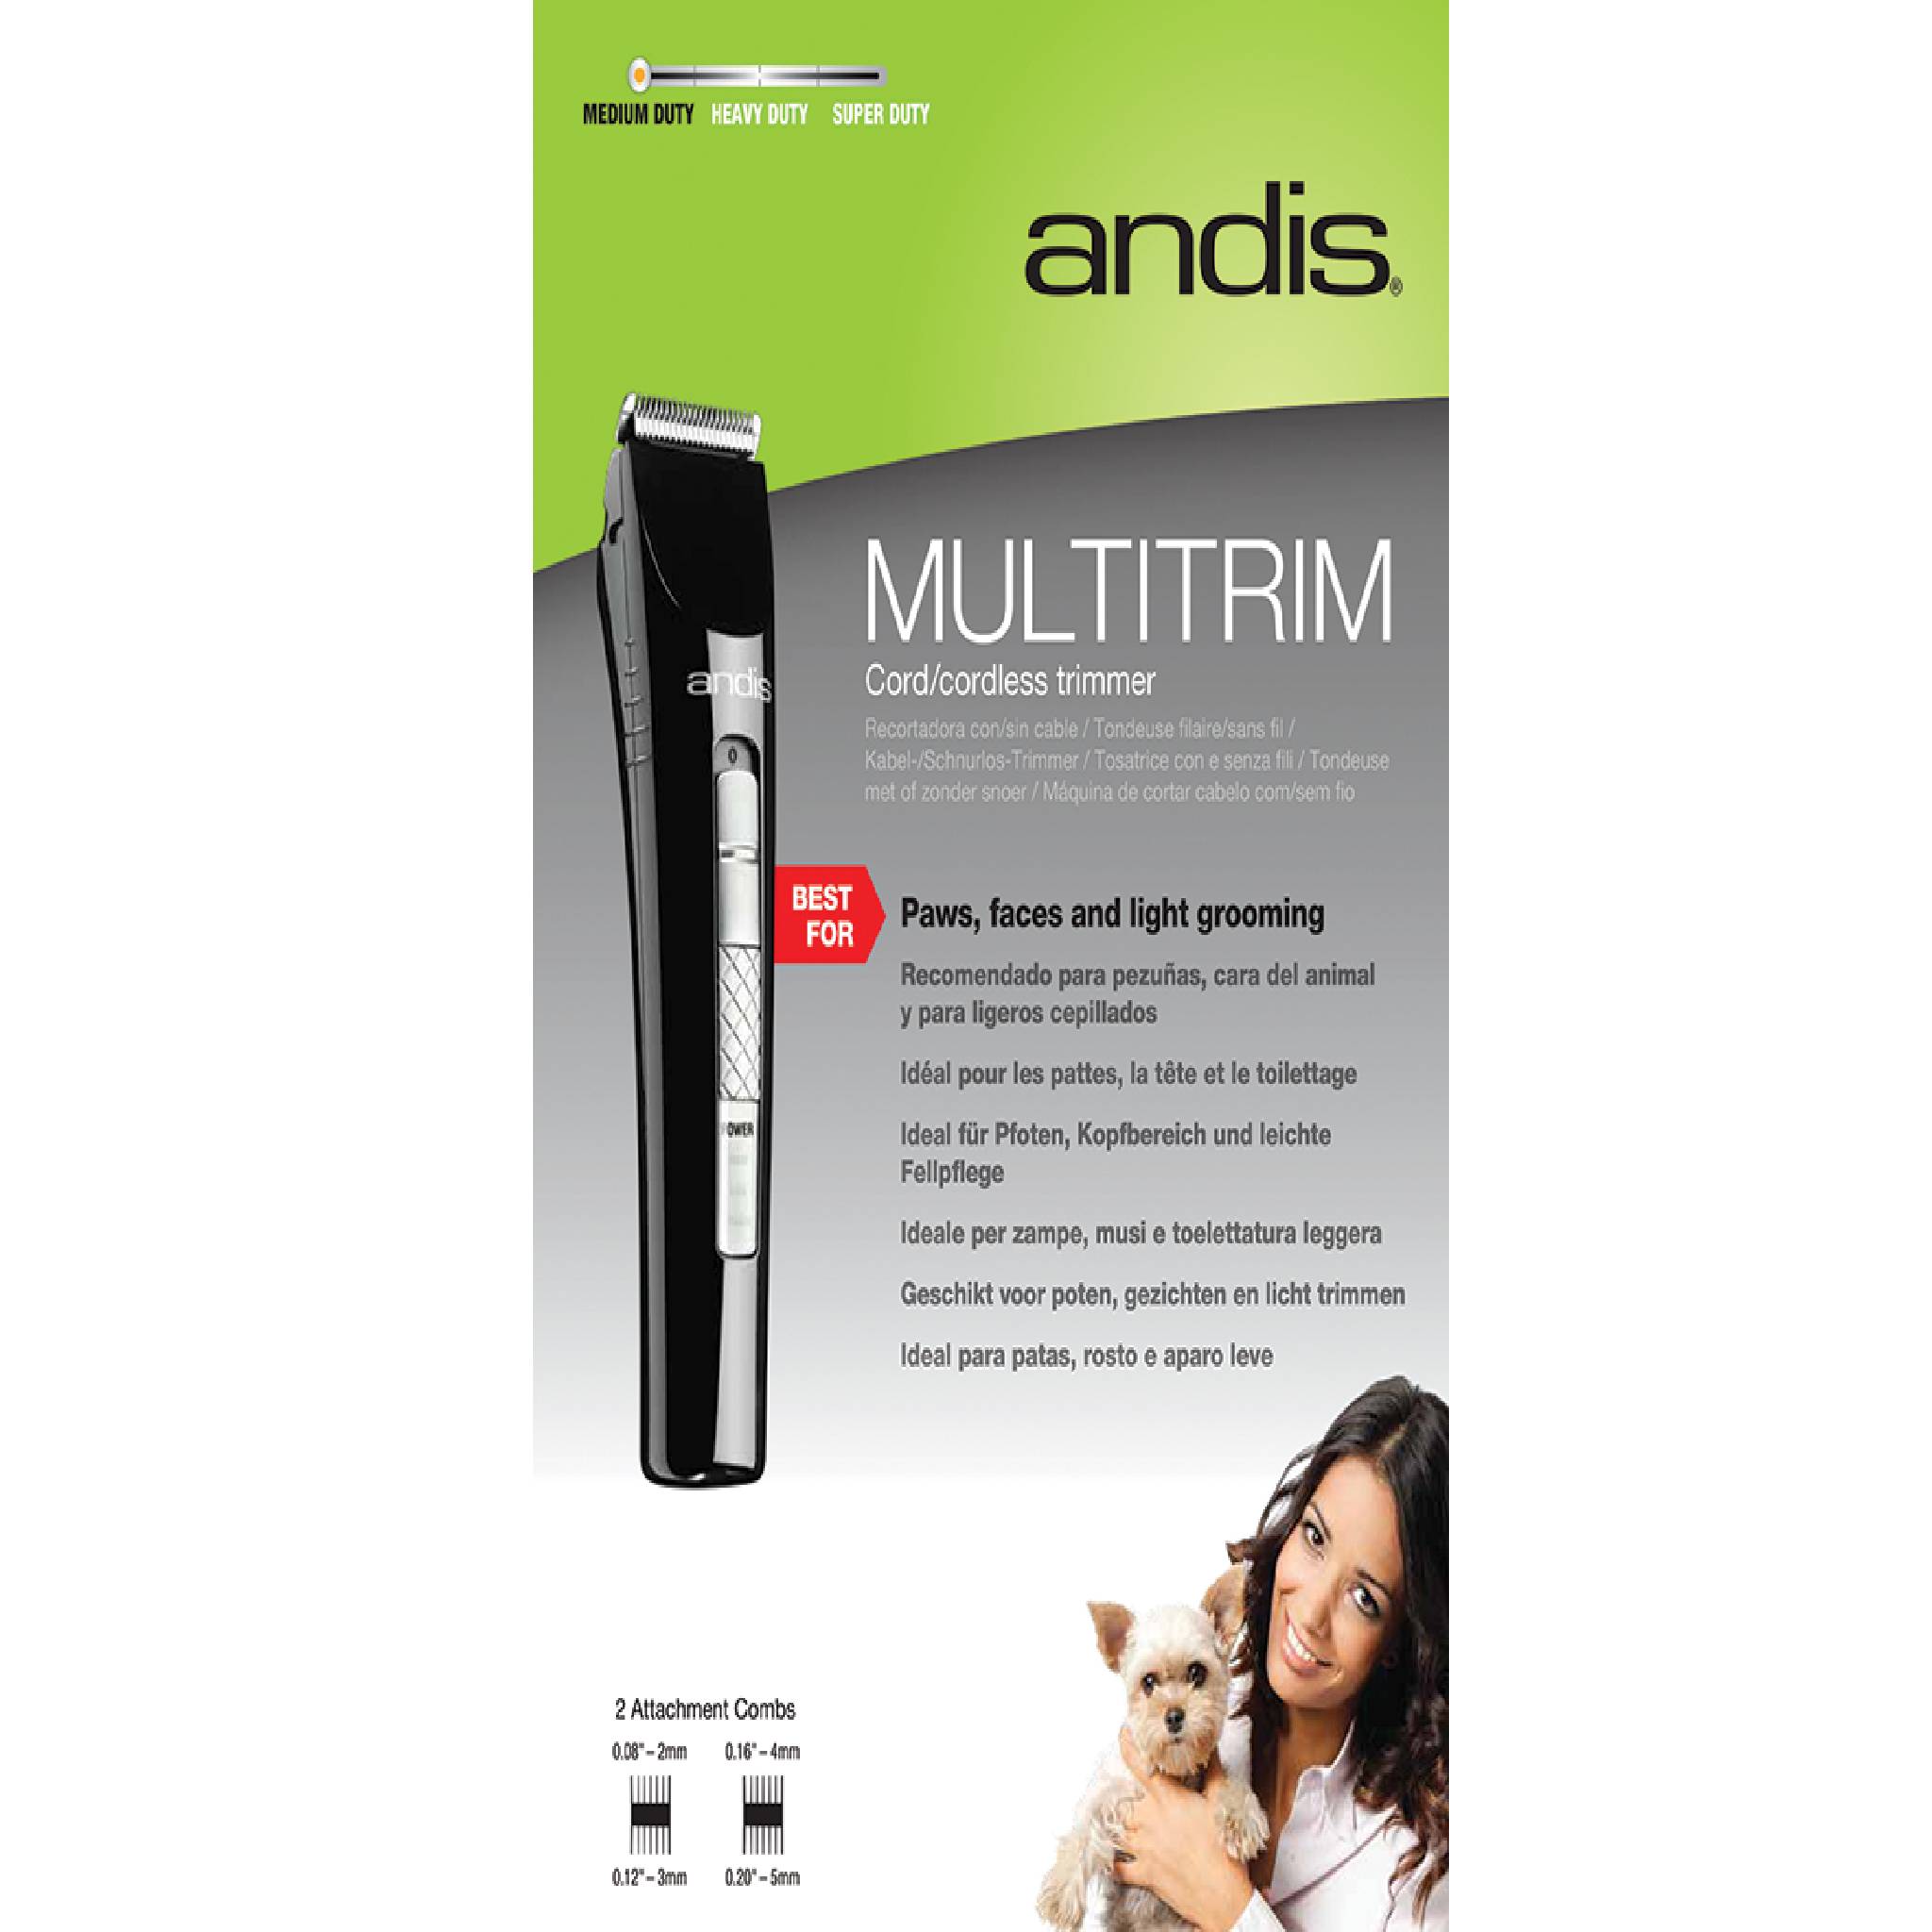 Andis Multi Trim Clt Trimmer & Replacement Blade Combo